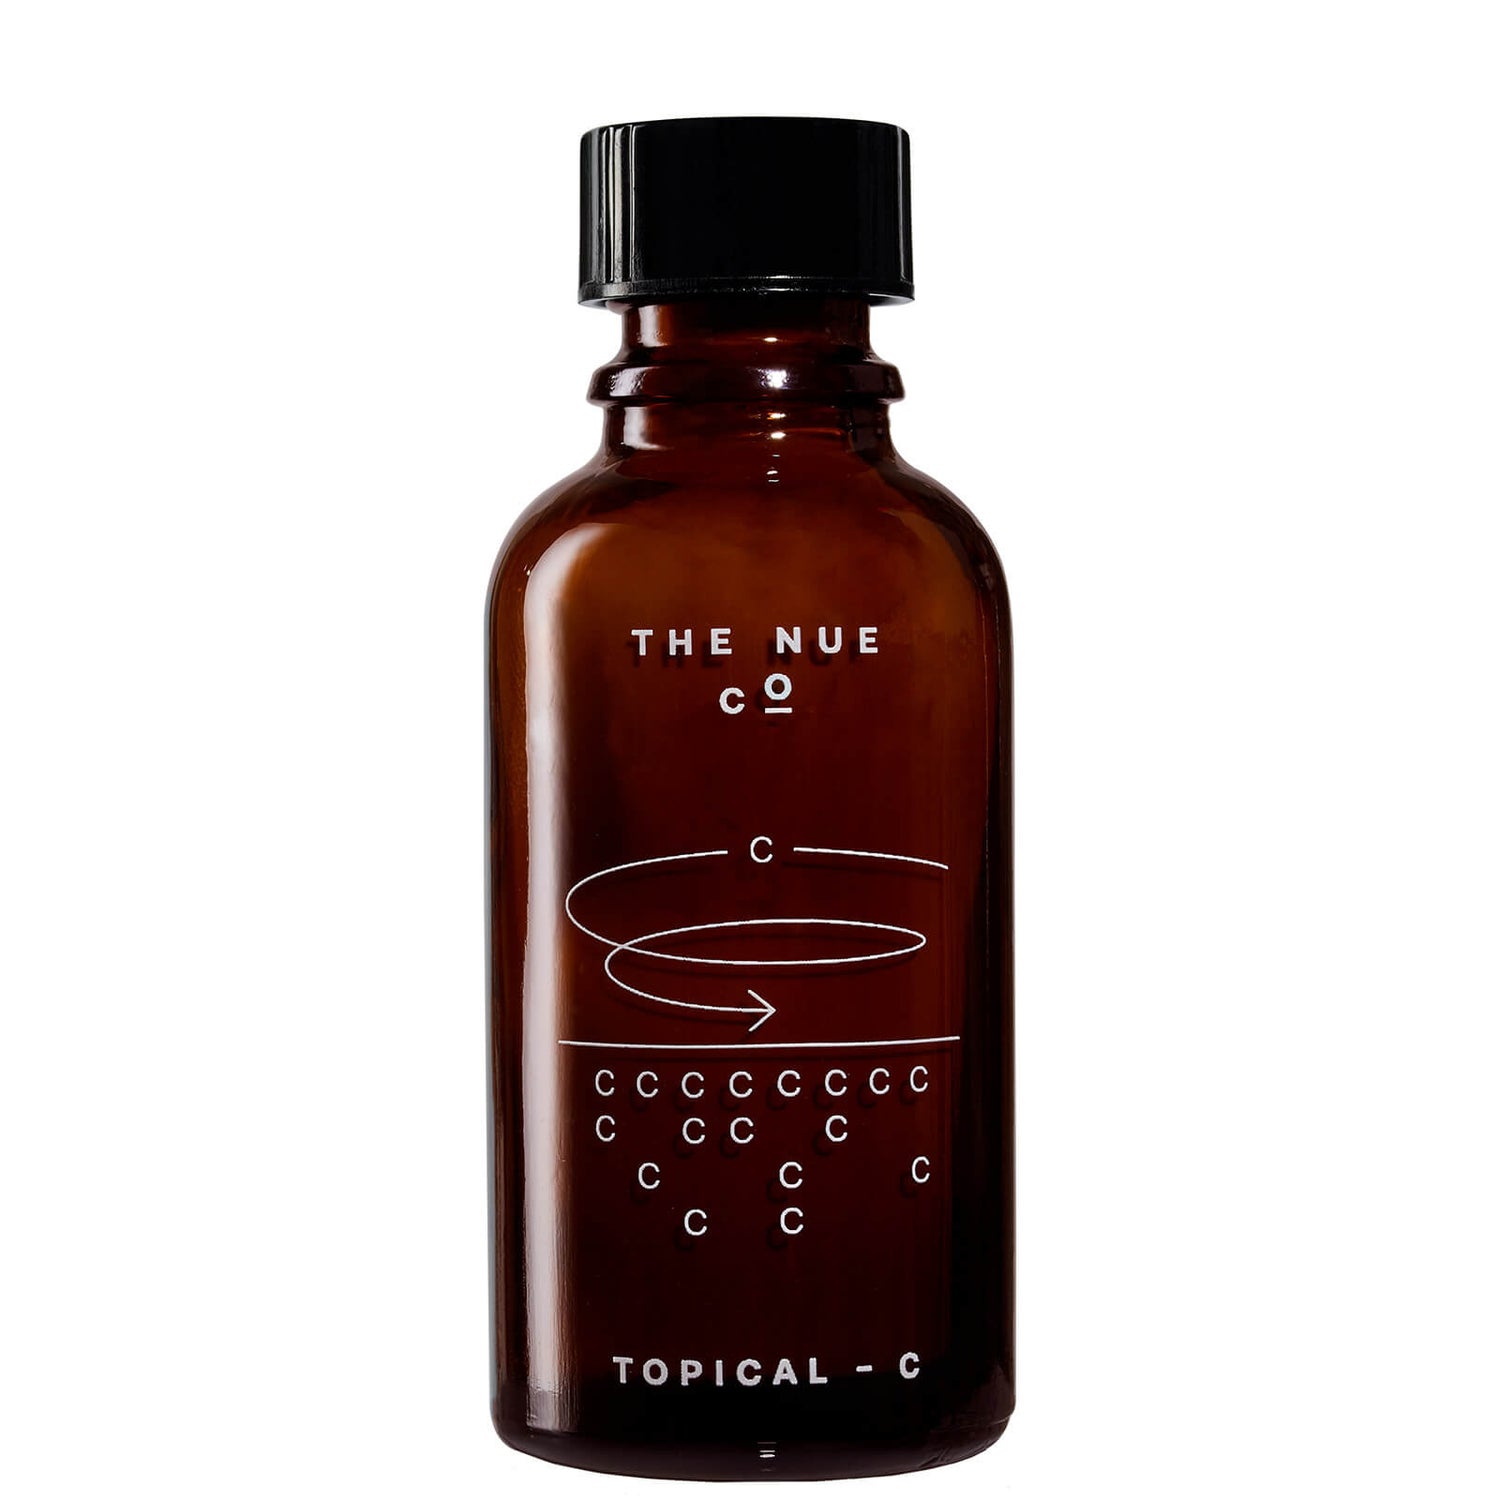 The Nue Co. Topical-C 15ml